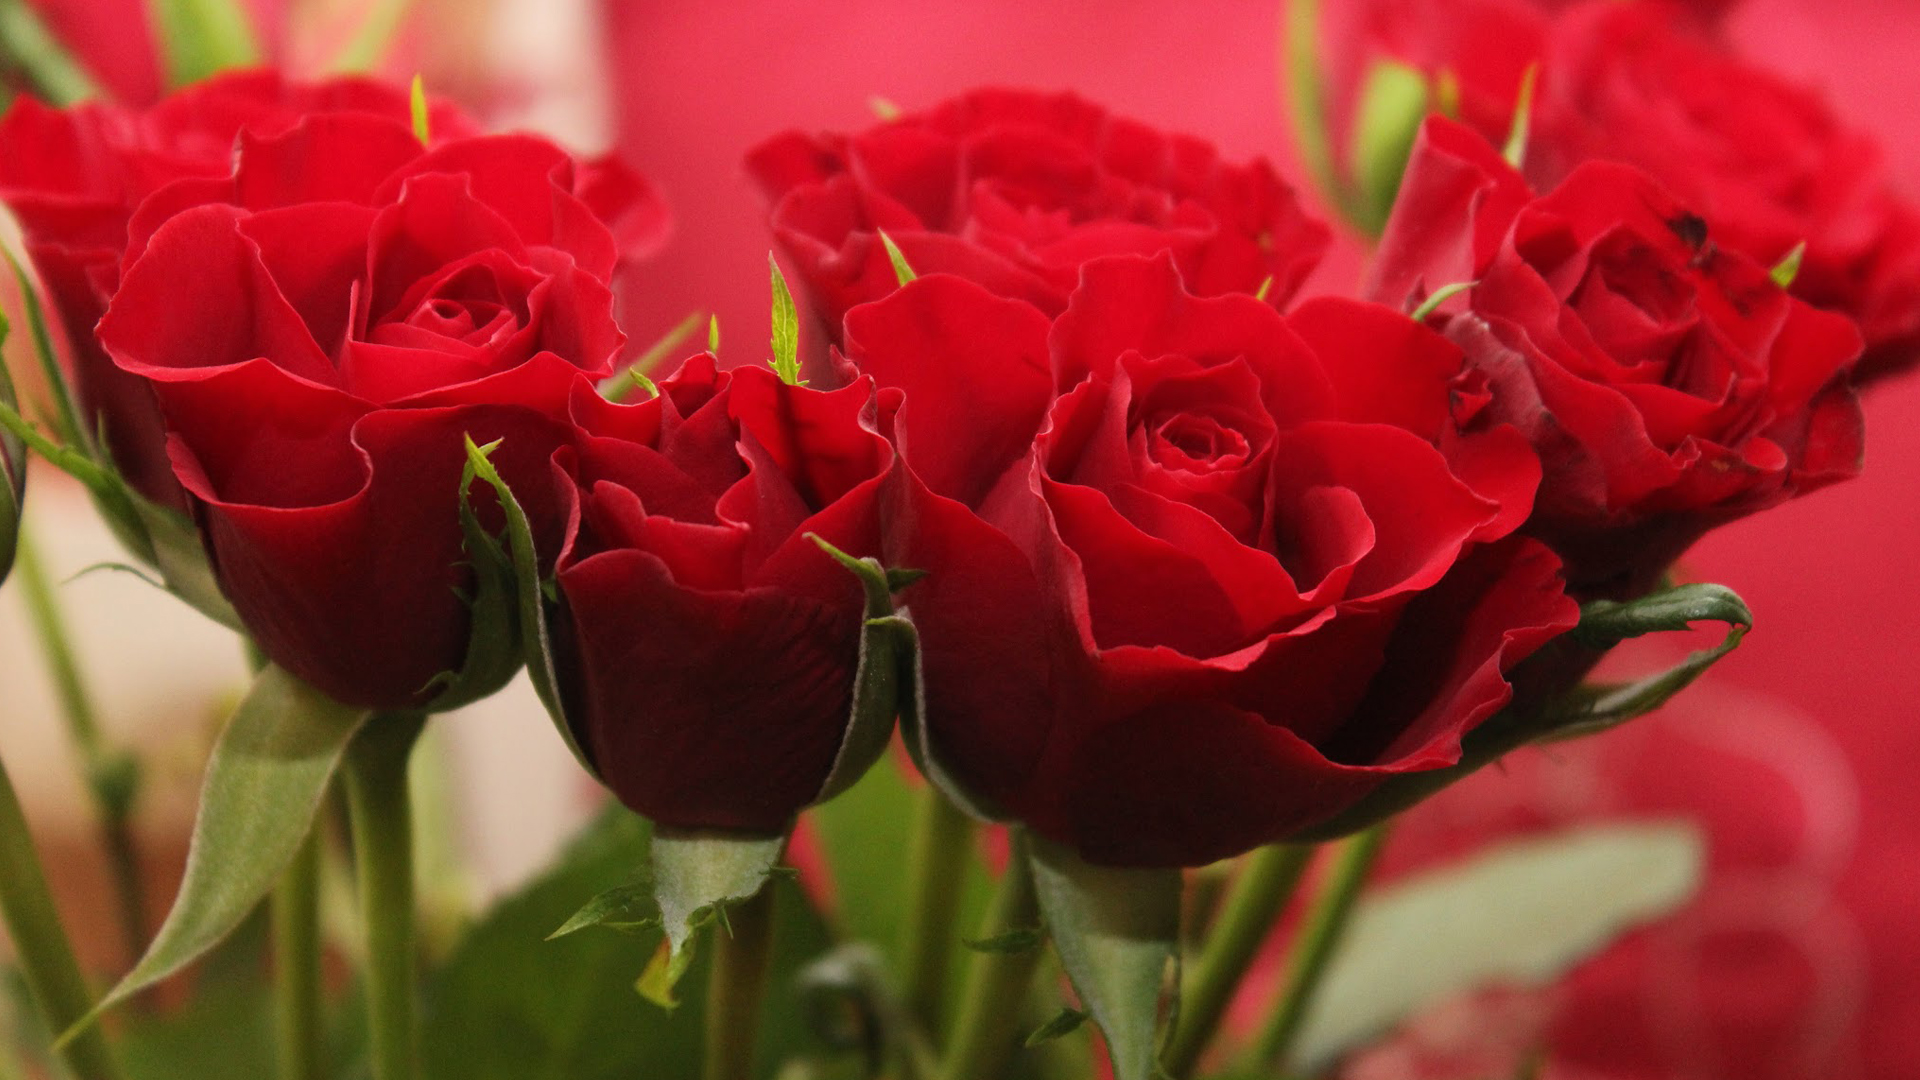 Pictures Of Red Roses in Close Up for Wallpaper - HD Wallpapers ...